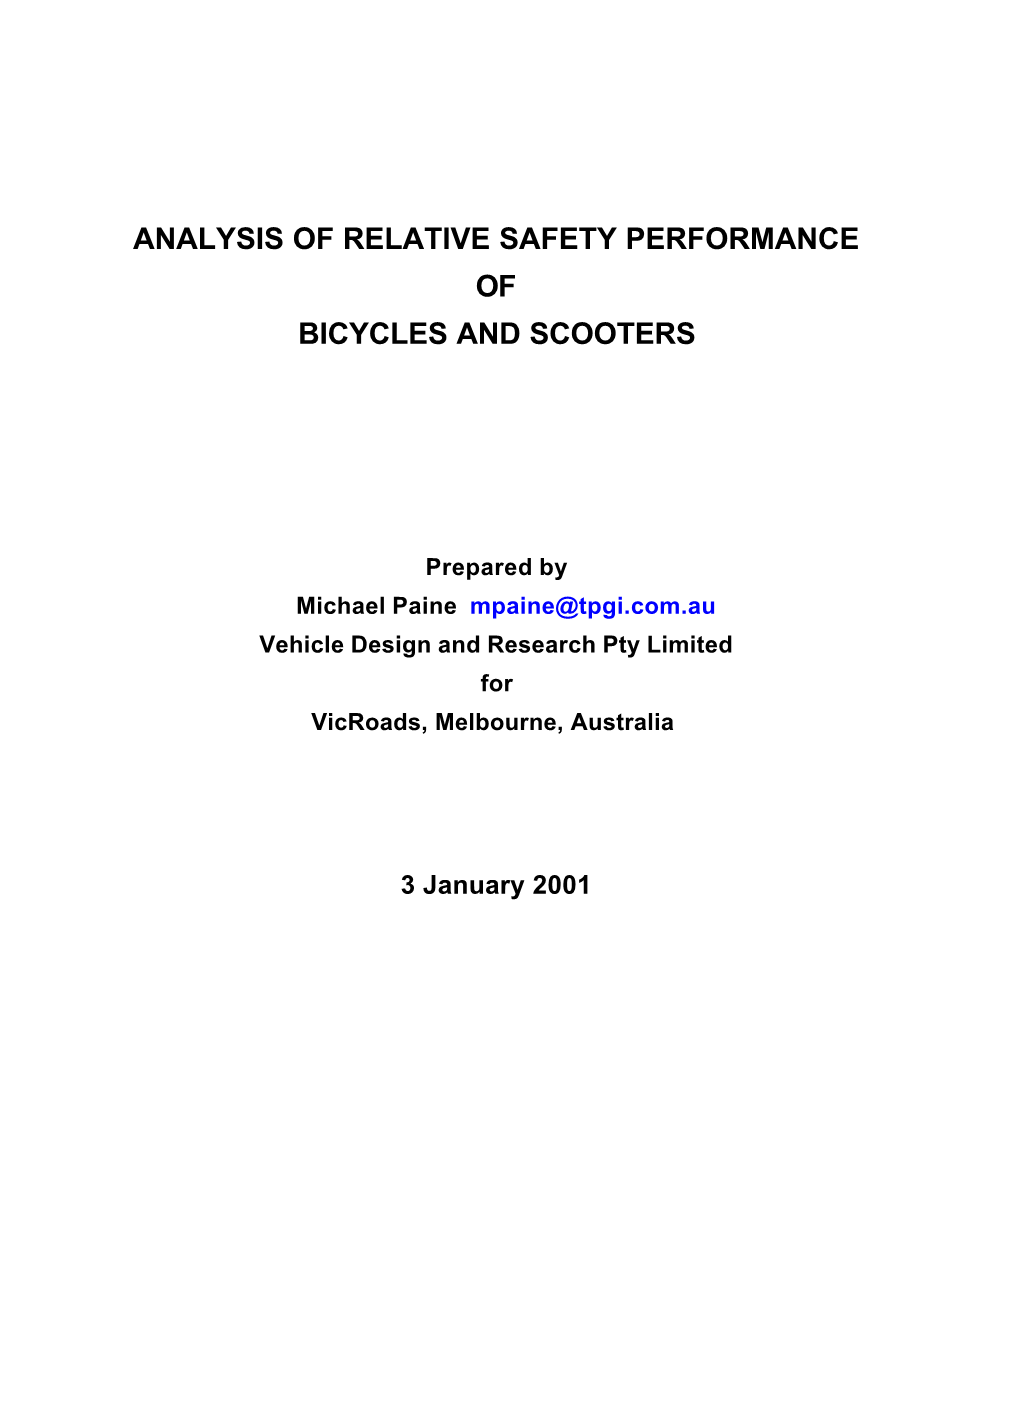 Analysis of Relative Safety Performance of Bicycles and Scooters